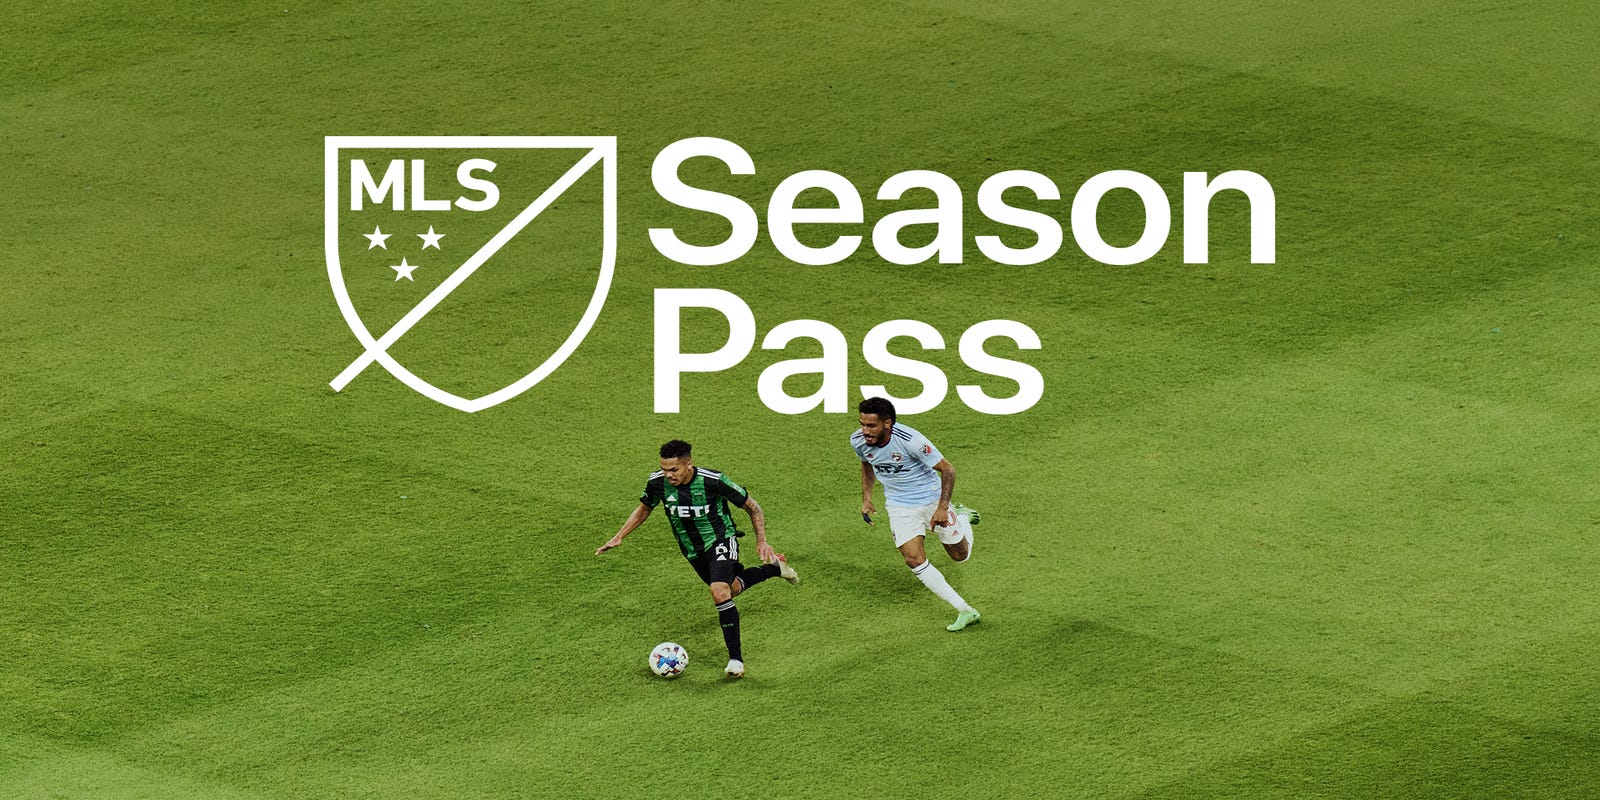 MLS, Apple announce MLS Season Pass. What fans need to know before it launches in 2023